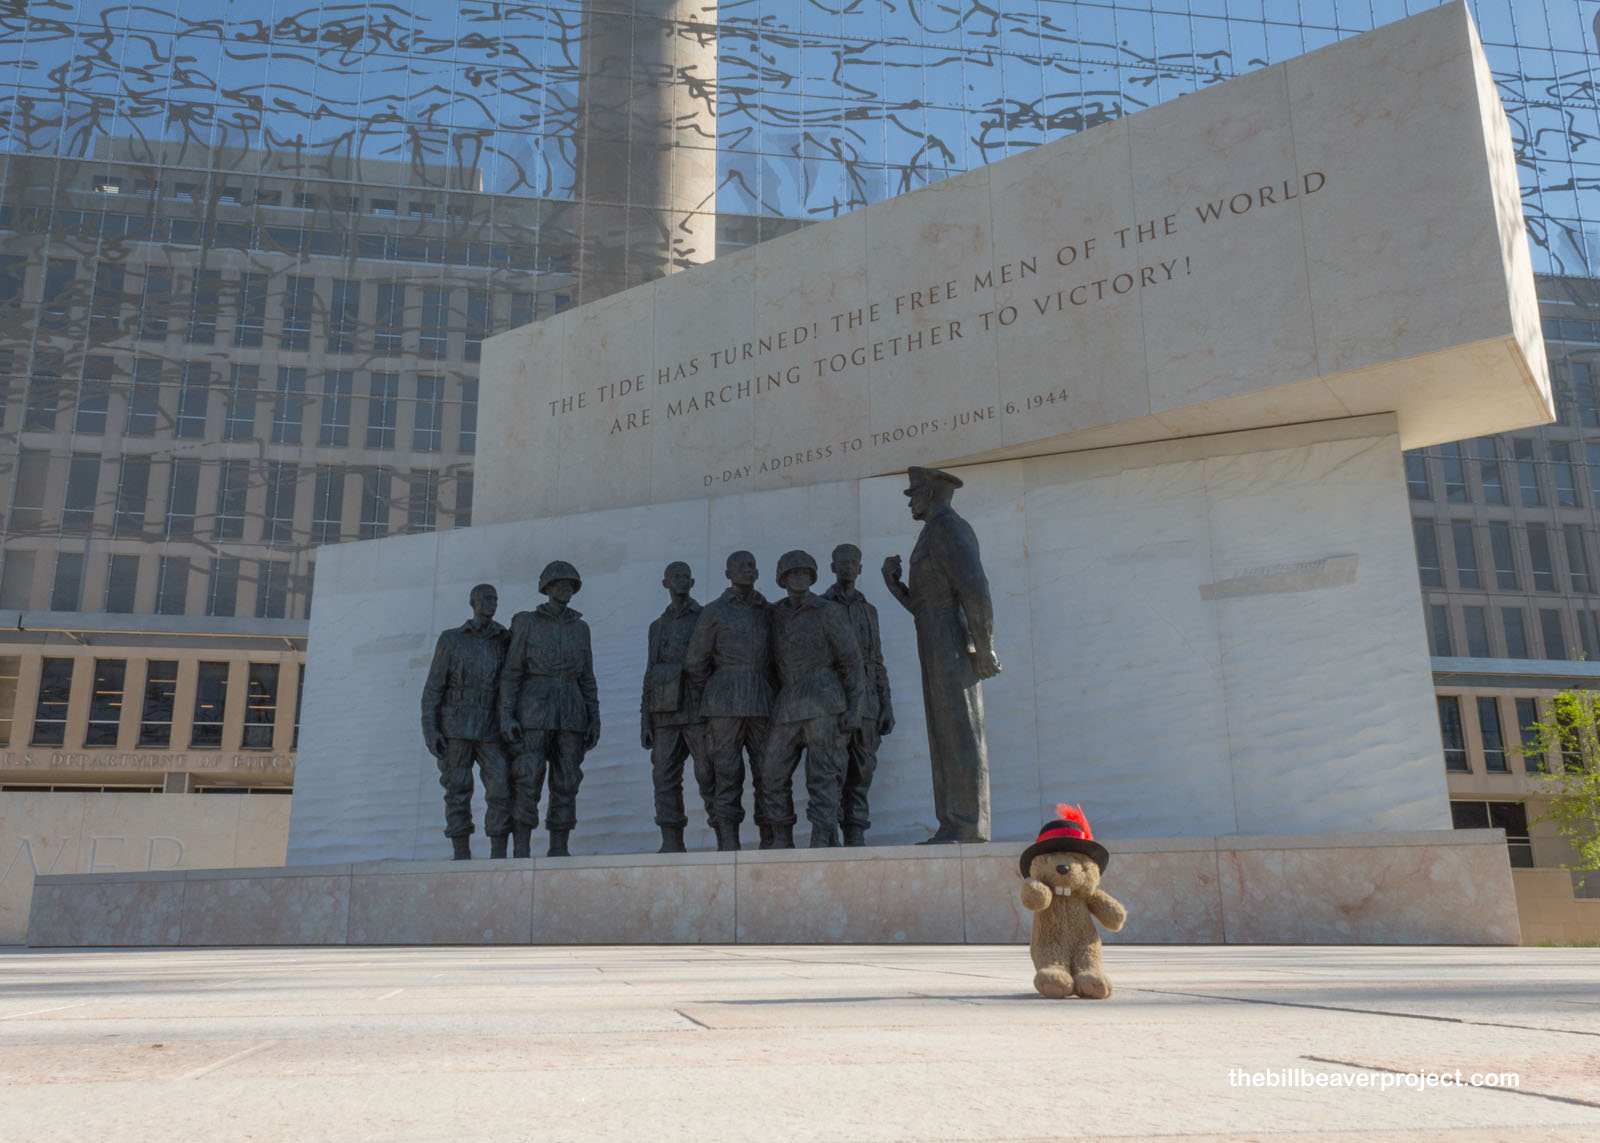 This side of the memorial commemorates Eisenhower's military career!